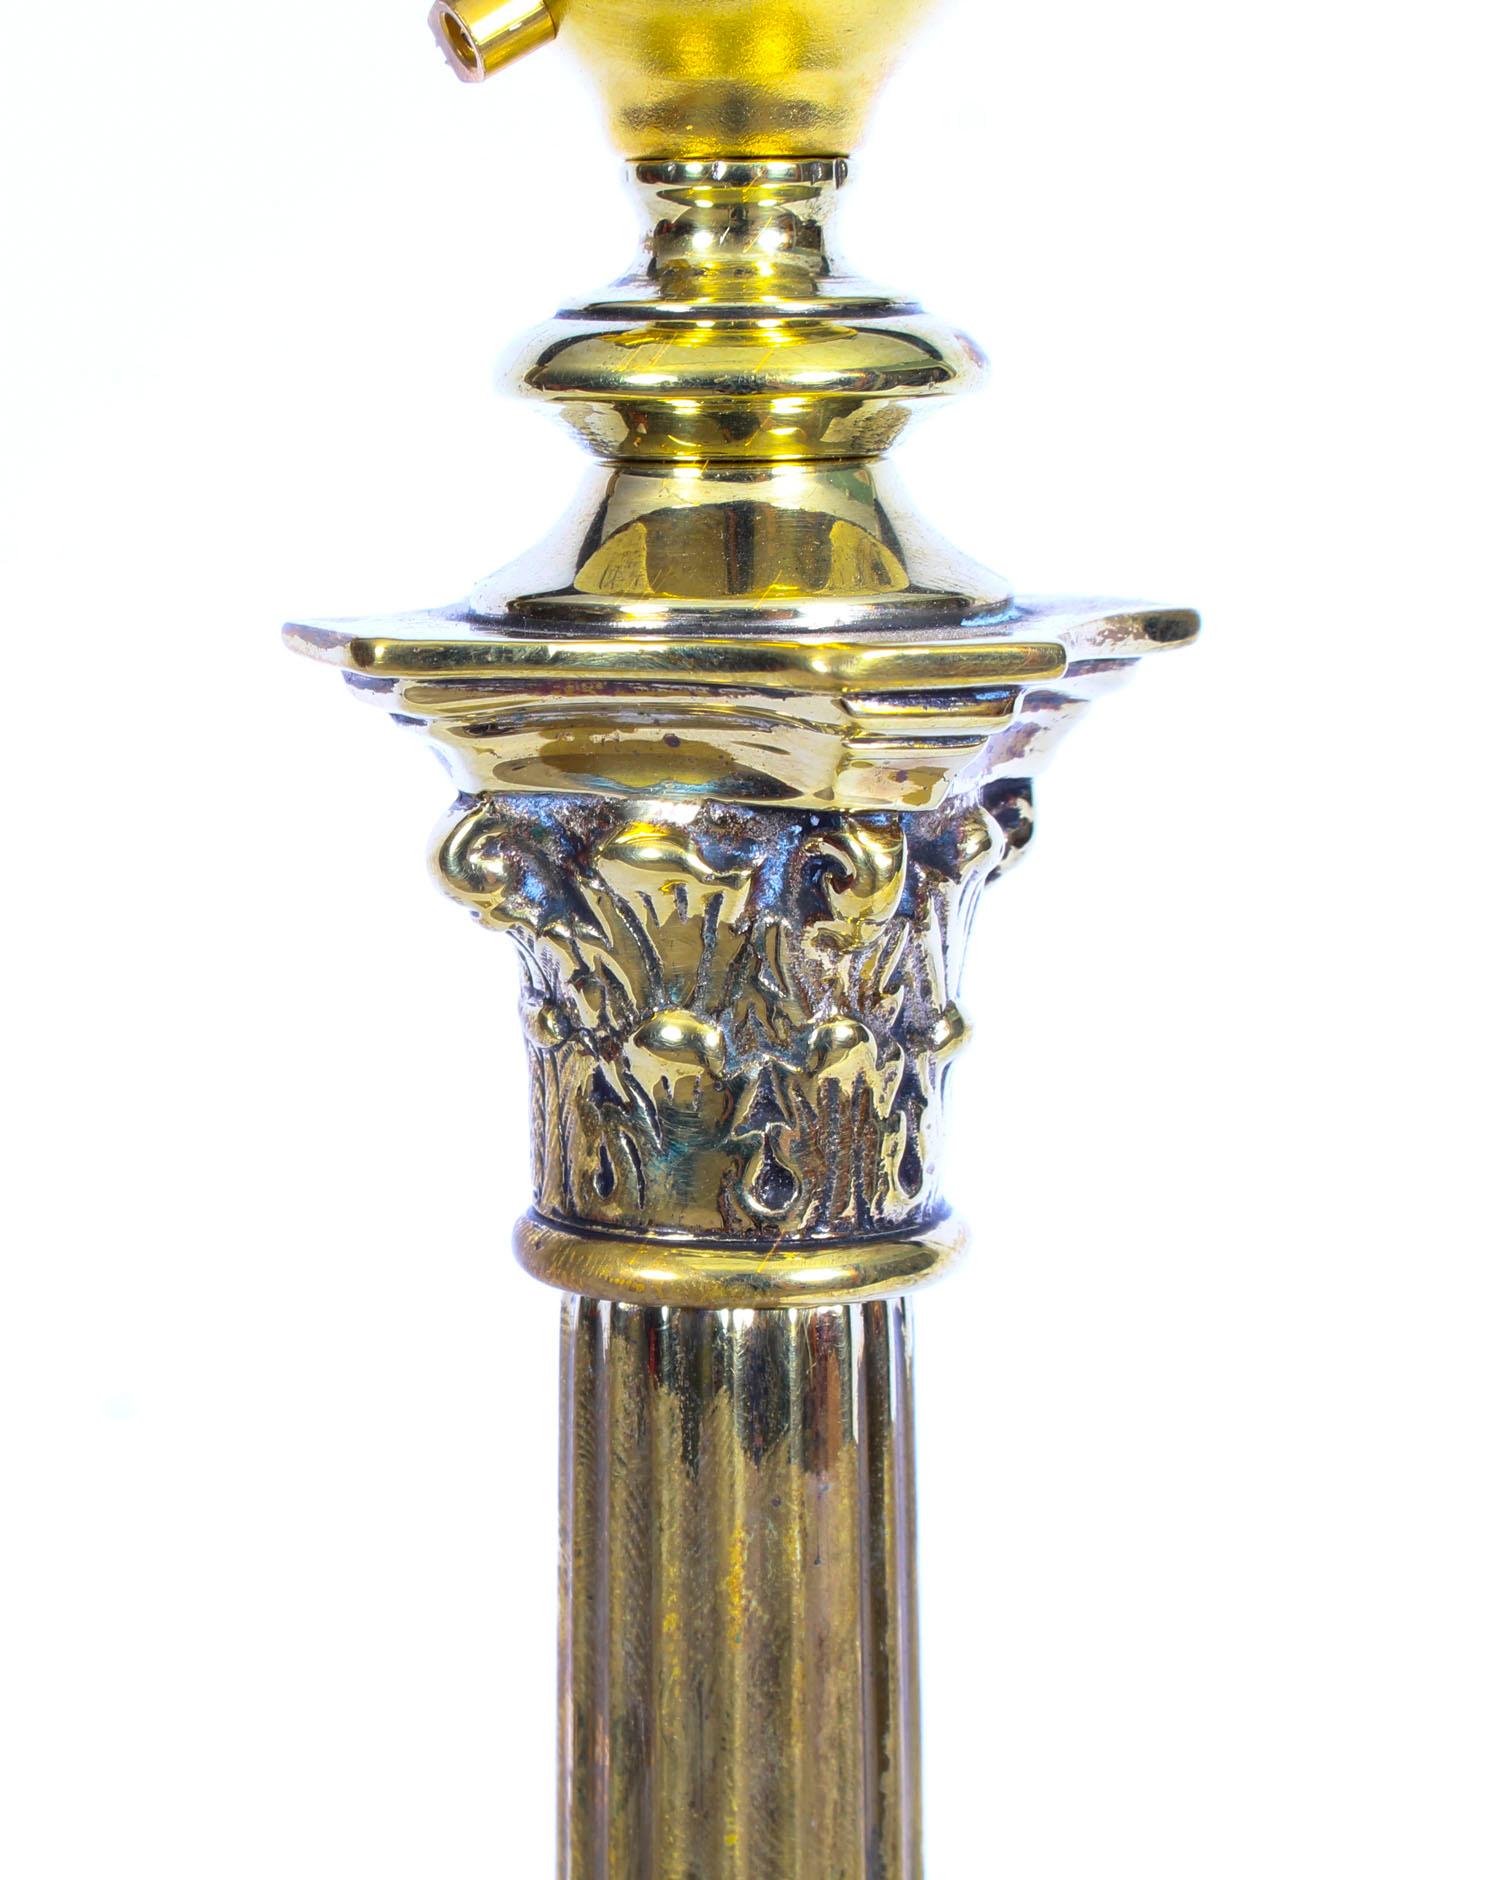 A late 19th century English antique polished brass Corinthian column table lamp light raised on a weighted stepped square pedestal base. Rewired. Measures: 41cm x 13cm x 13cm.

This is a splendid antique Victorian brass Corinthian column table lamp